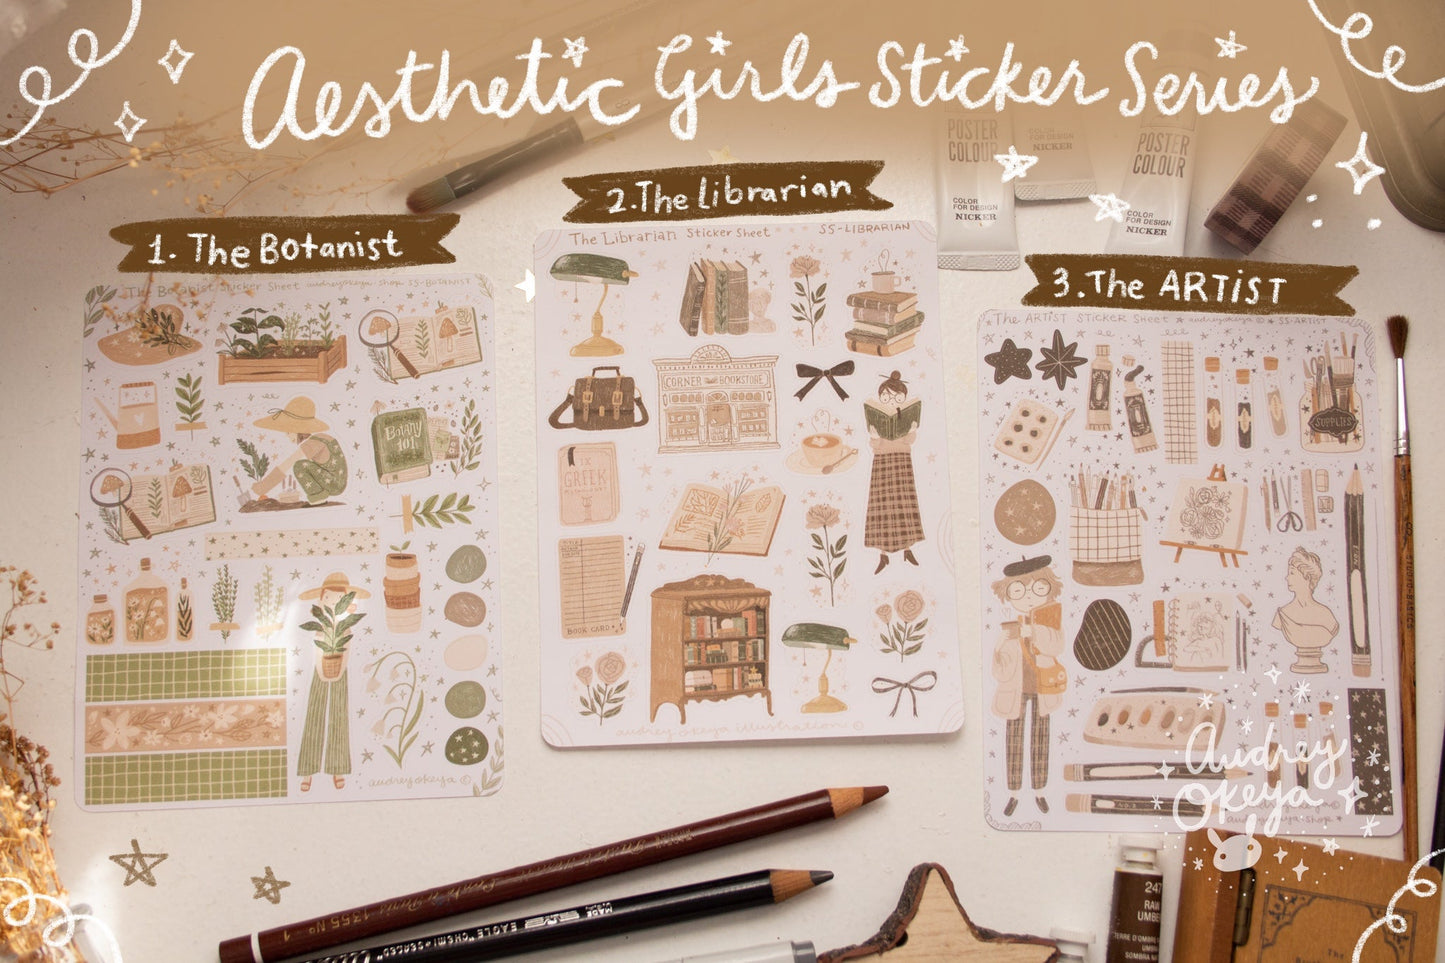 Aesthetic Girls Sticker Sheets - 3 Diff Kinds!